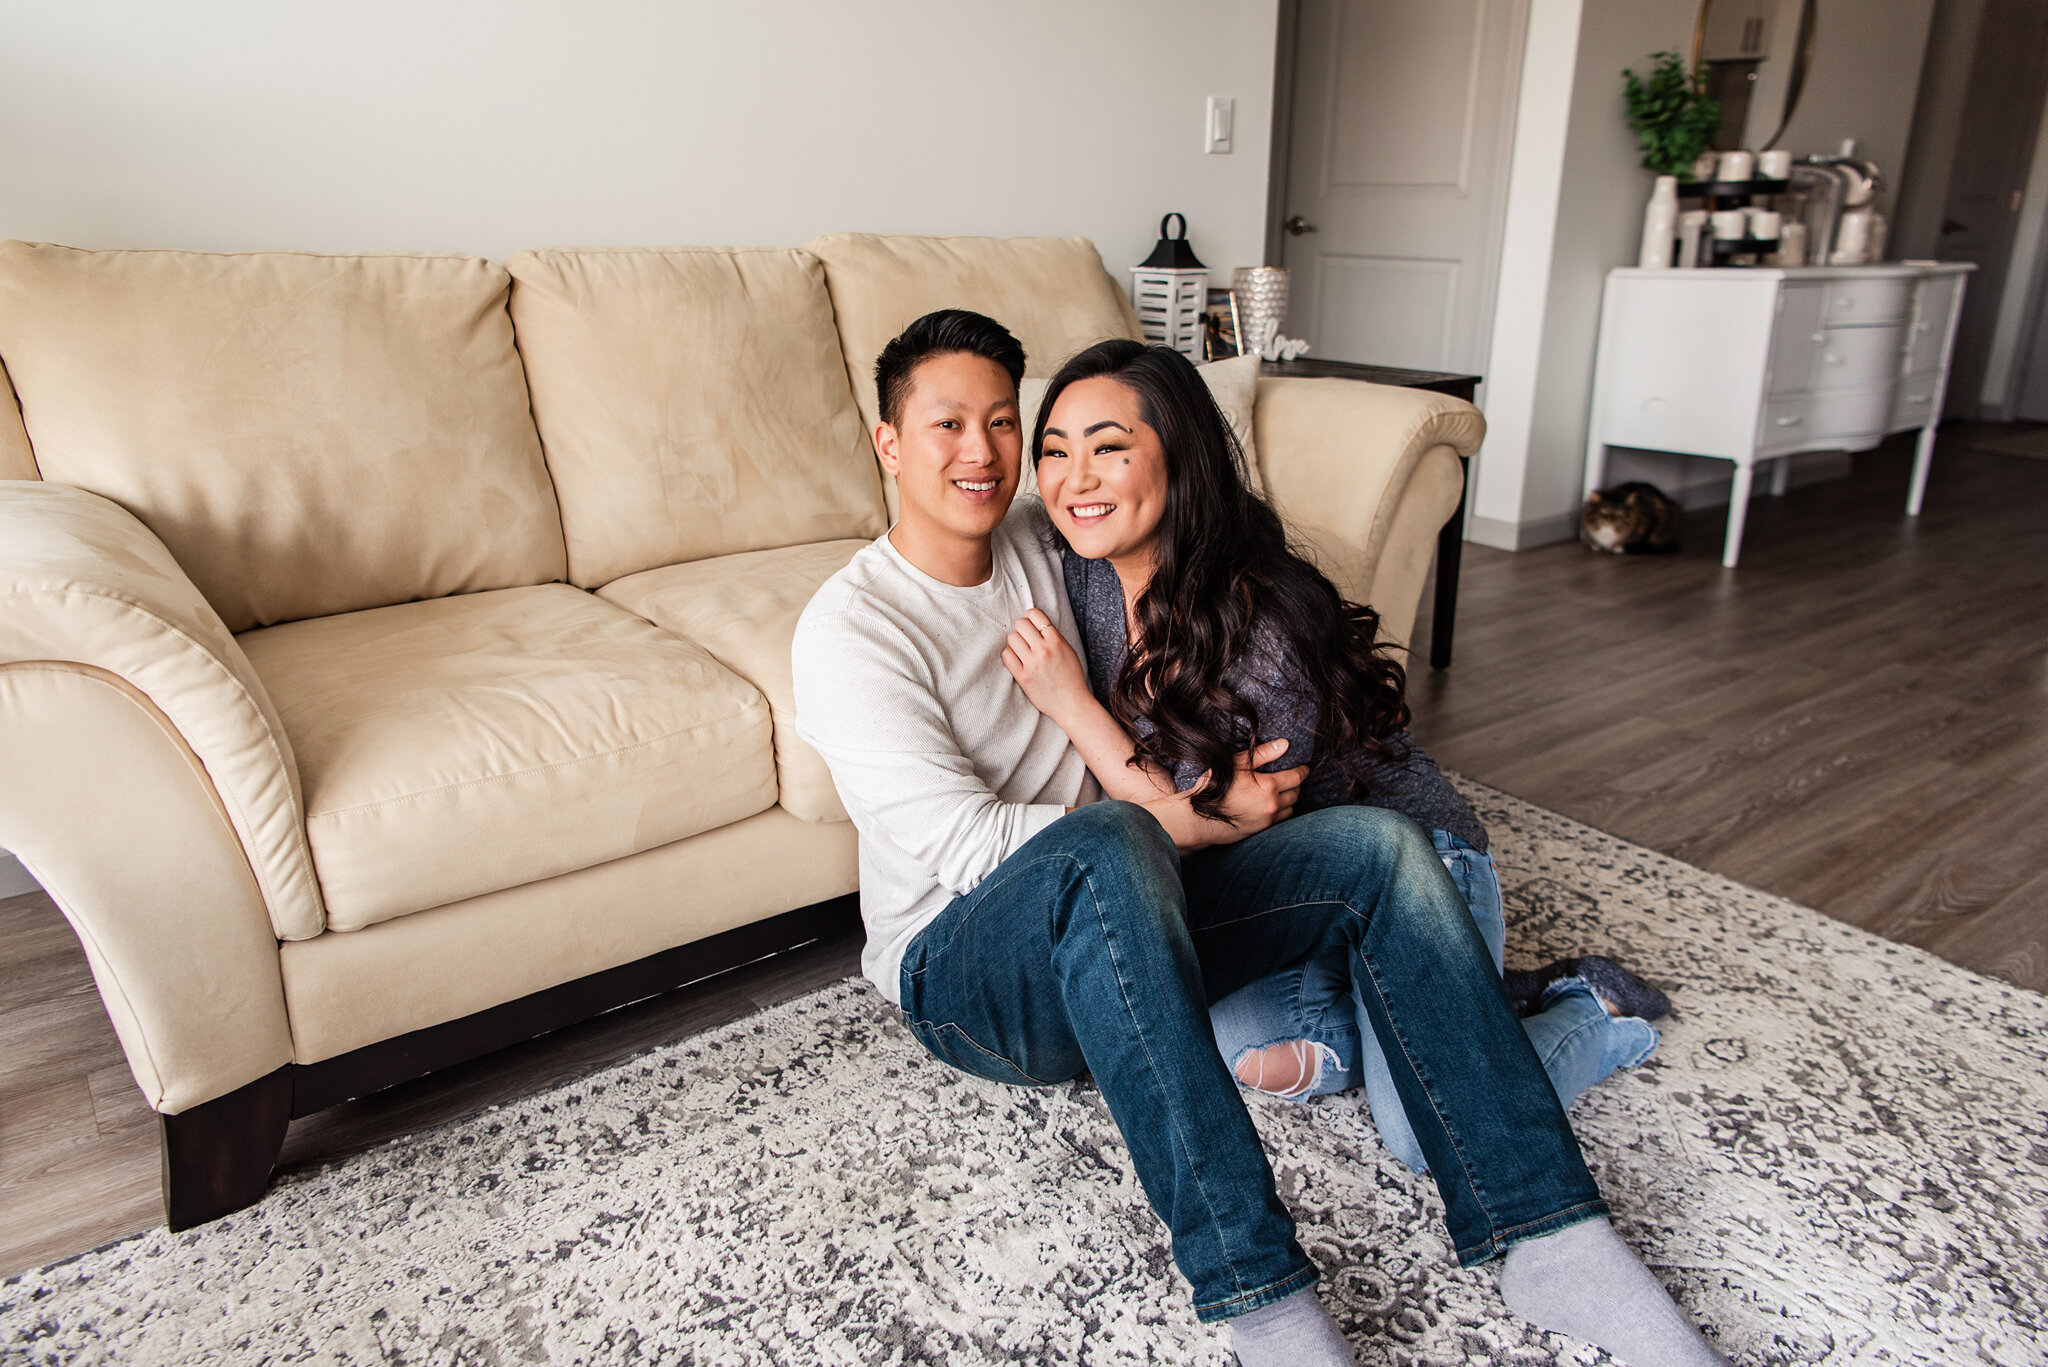 In_Home_Rochester_Couples_Session_JILL_STUDIO_Rochester_NY_Photographer_4053.jpg